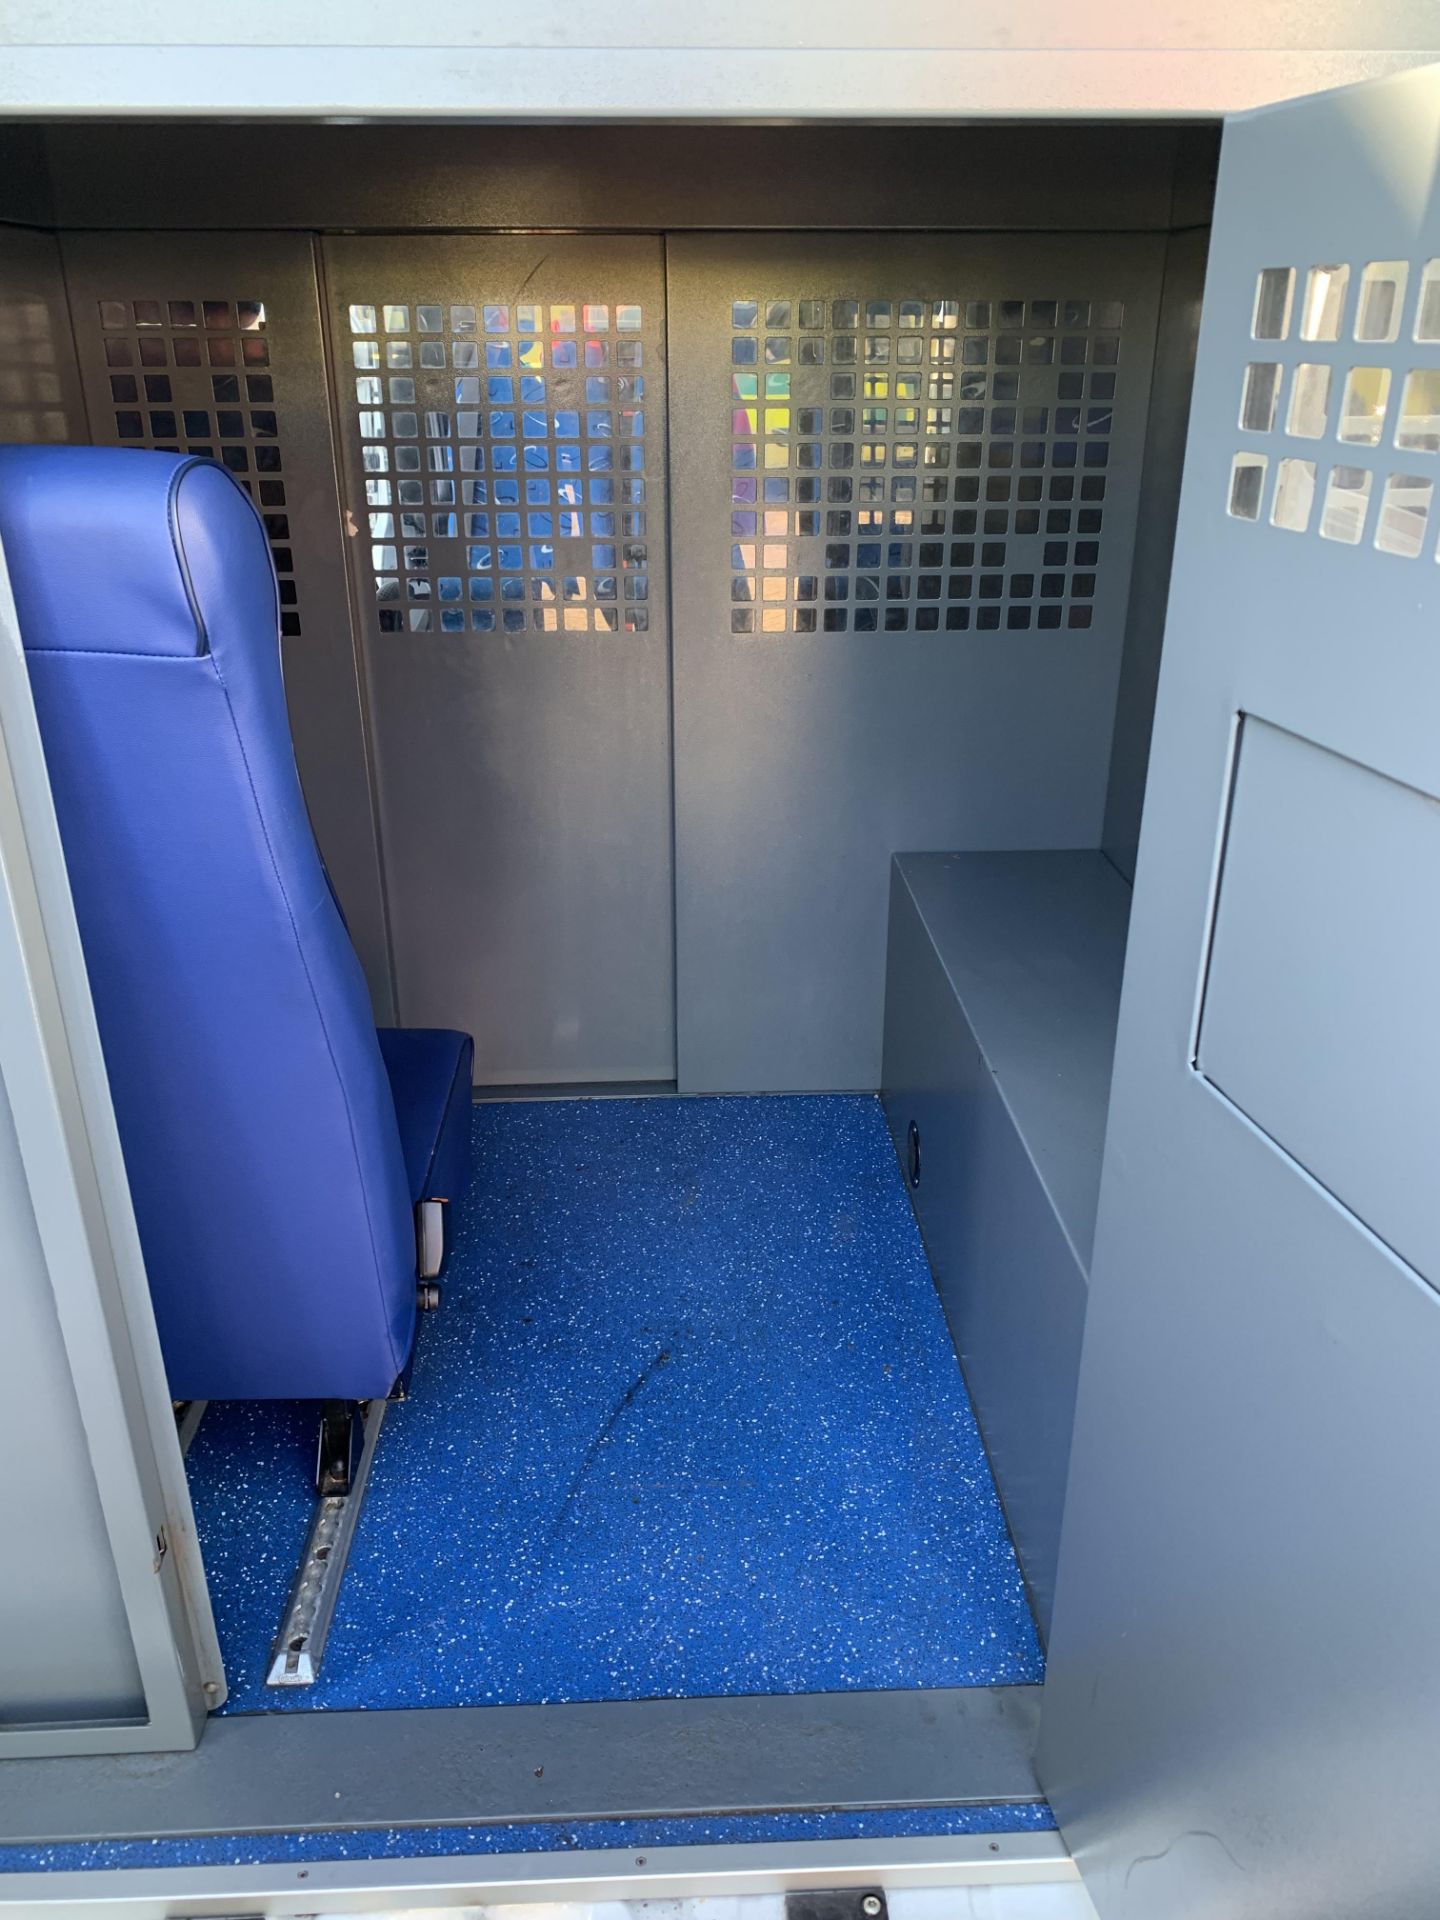 Citroen Relay 35 L3H2 Eprise Blue HDI secure cell covert ambulance, with rear steel prison transport - Bild 15 aus 17